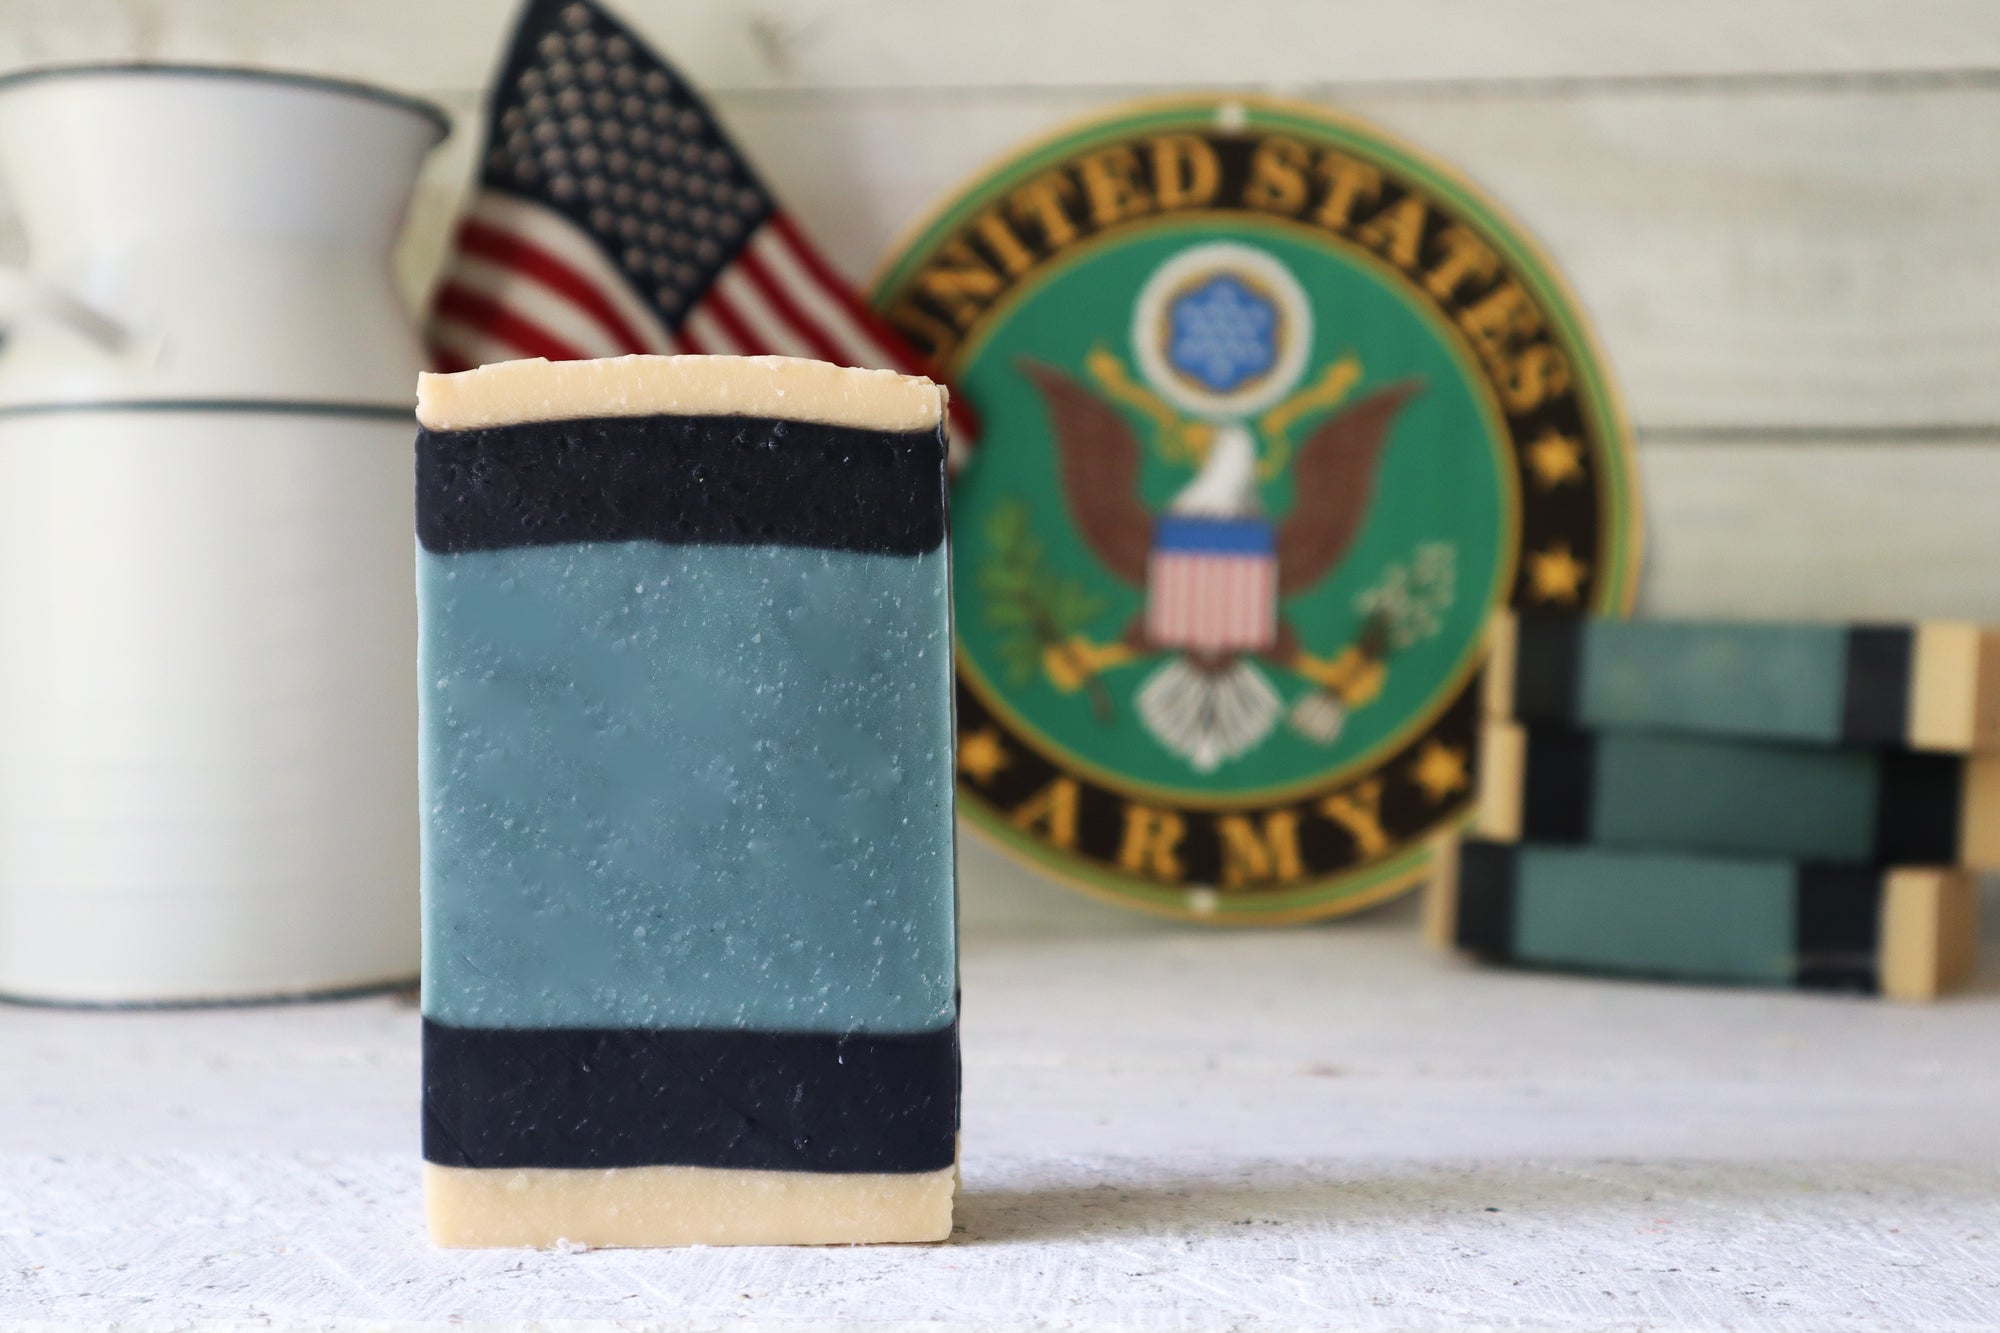 United States Army Soap